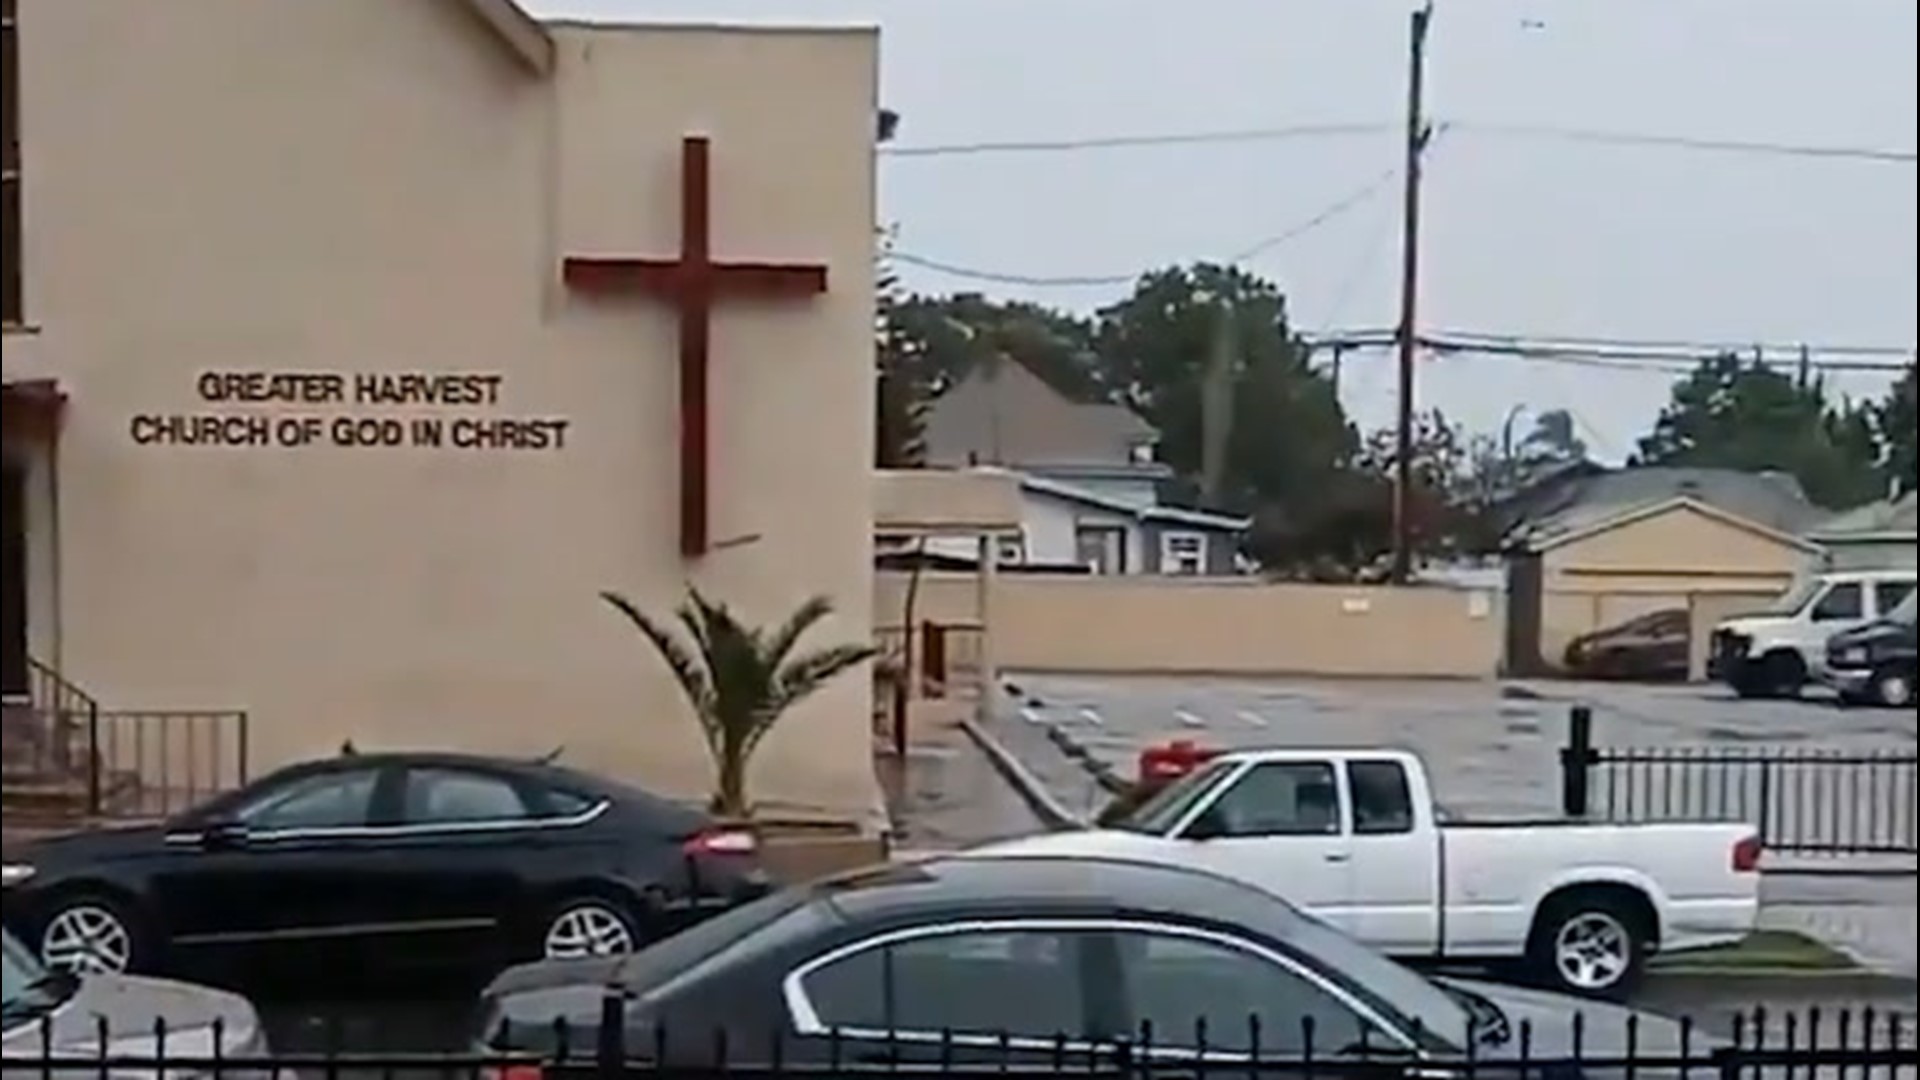 Powerful thunder roared over Long Beach, California, on March 3, setting off car alarms in a church parking lot.